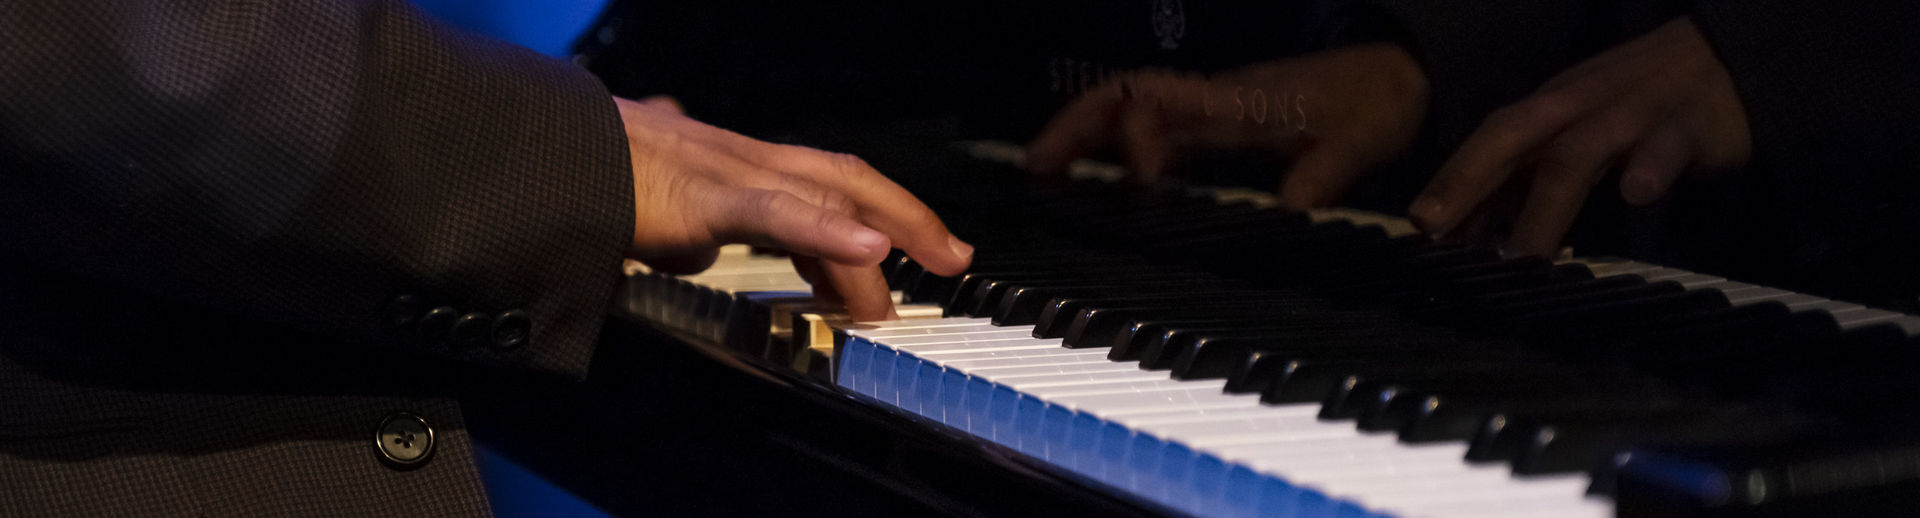 Hands are seen playing the piano.